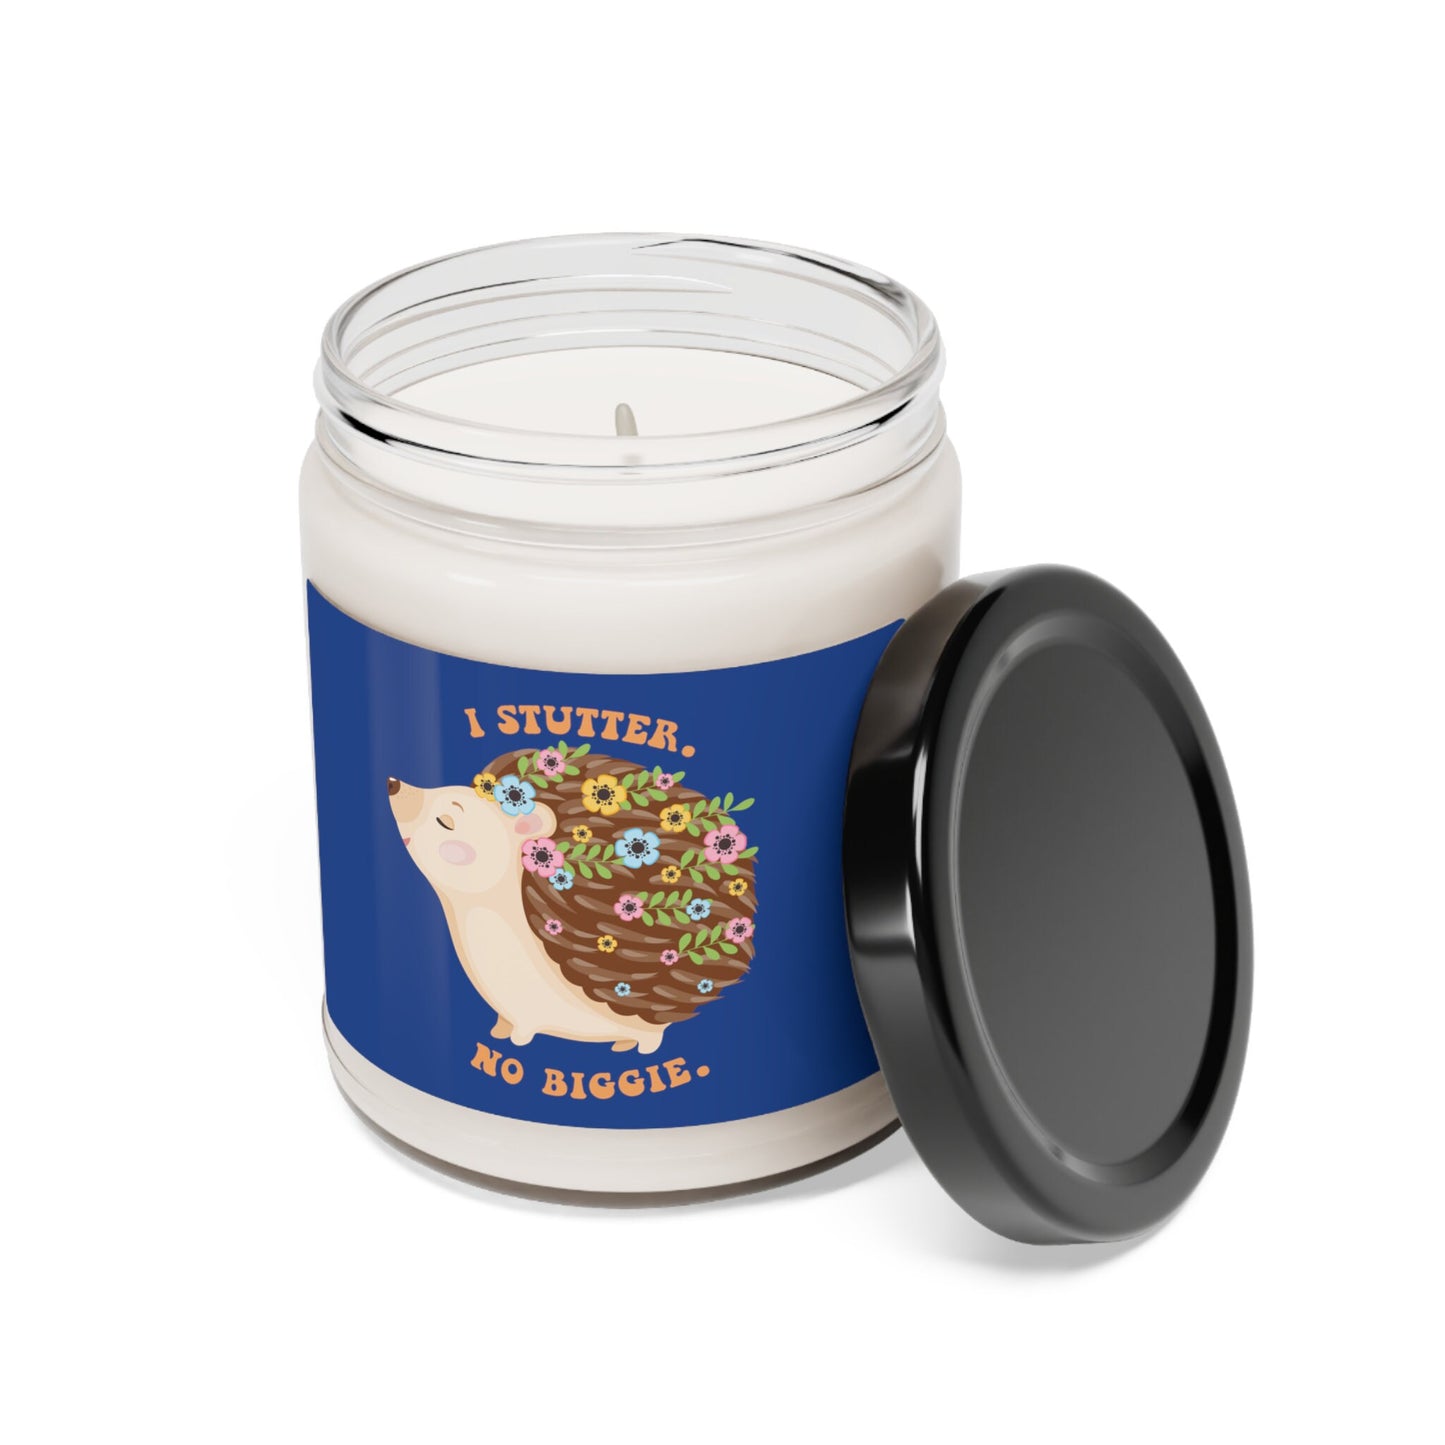 Stutter Hedgehog Candle Scented Soy Candle, 9oz